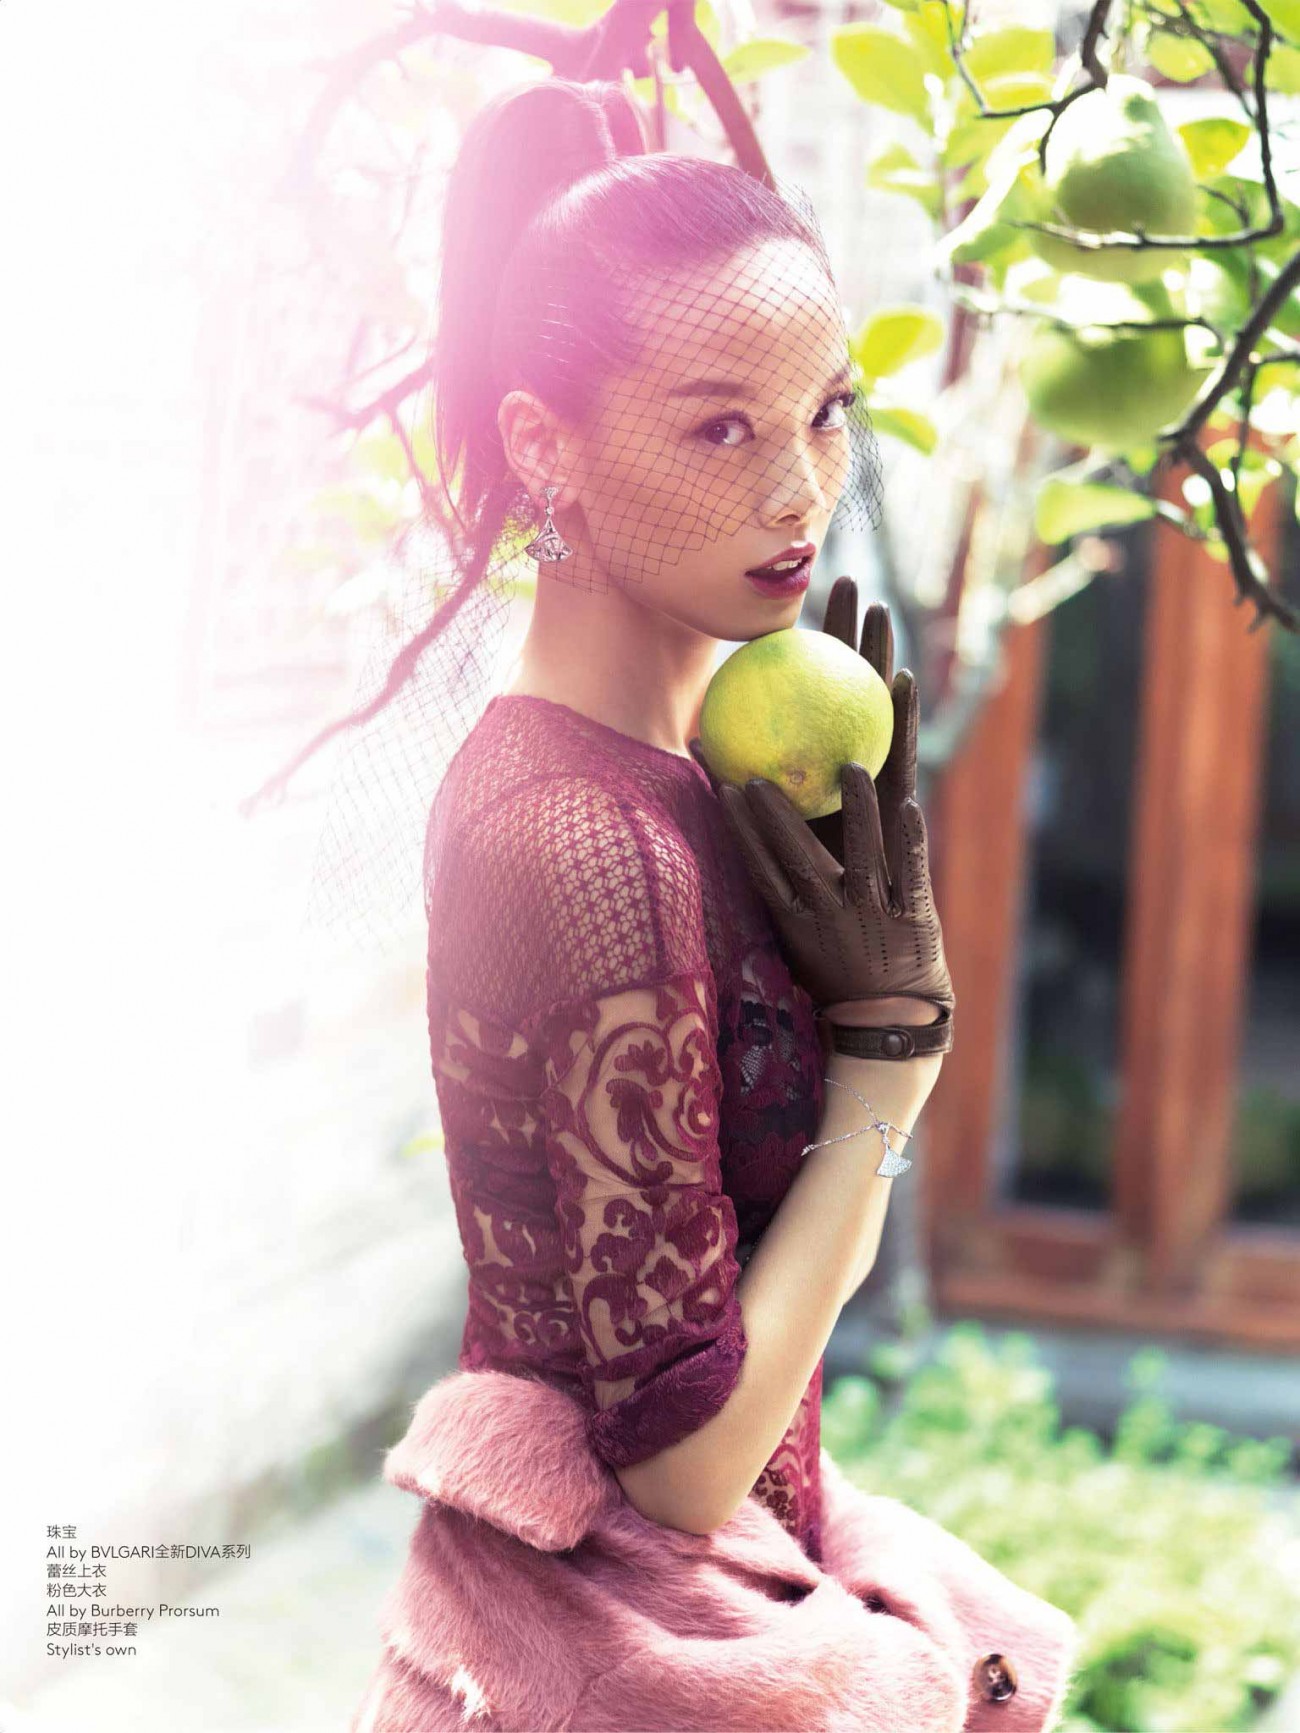 Grace-Gao-by-Yin-Chao-for-Vogue-China-City-Special-Chengdu_02.jpg